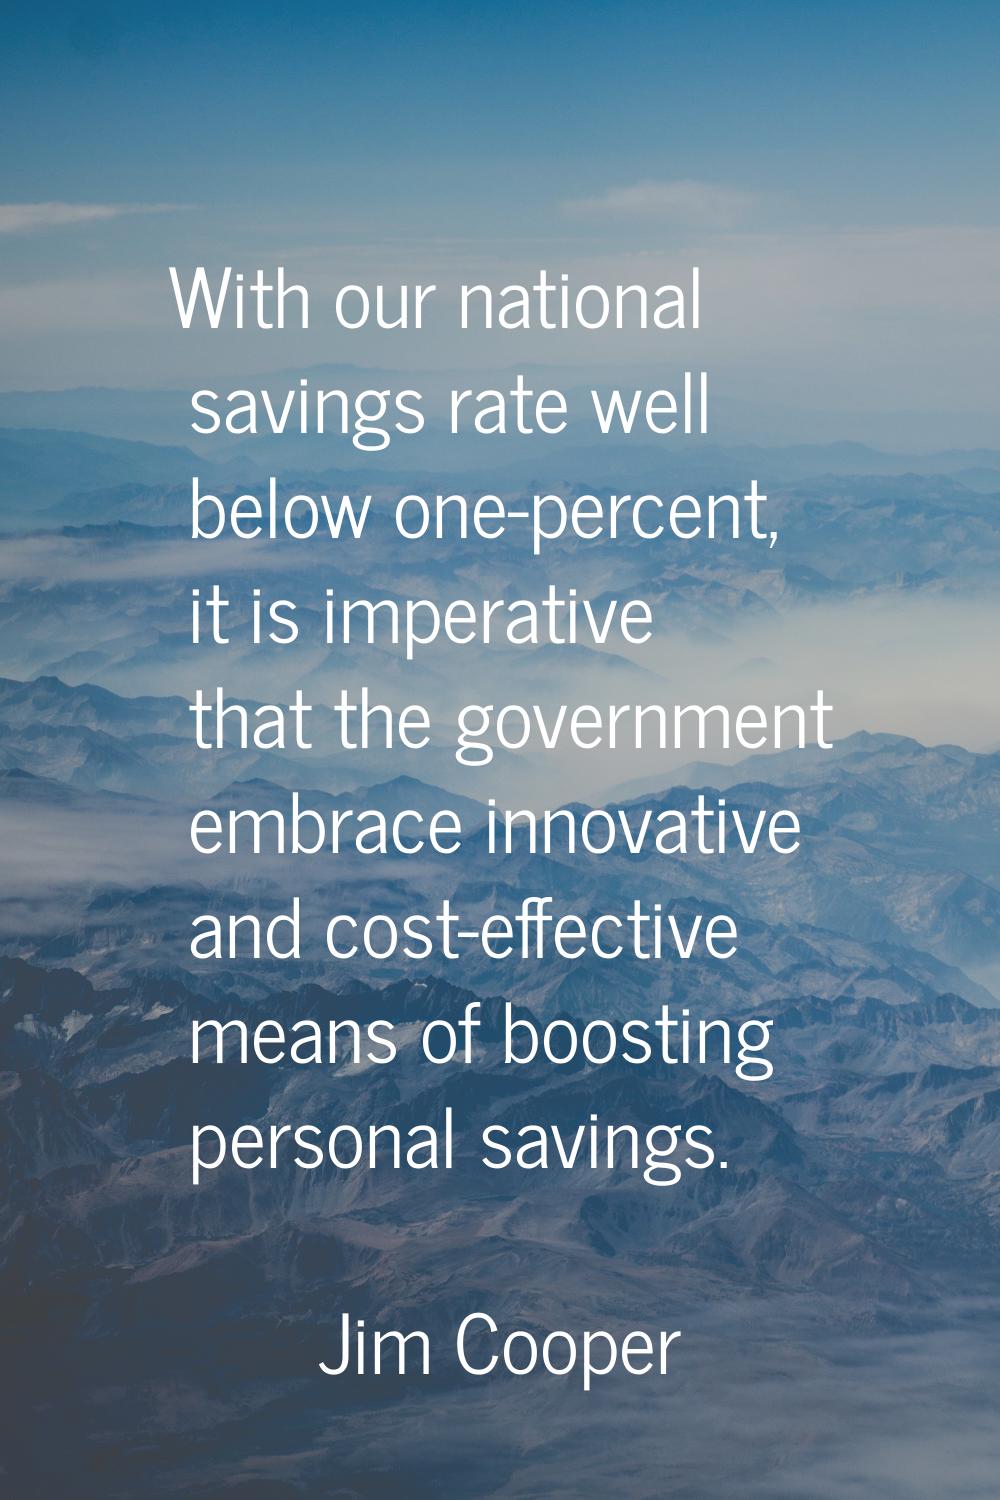 With our national savings rate well below one-percent, it is imperative that the government embrace